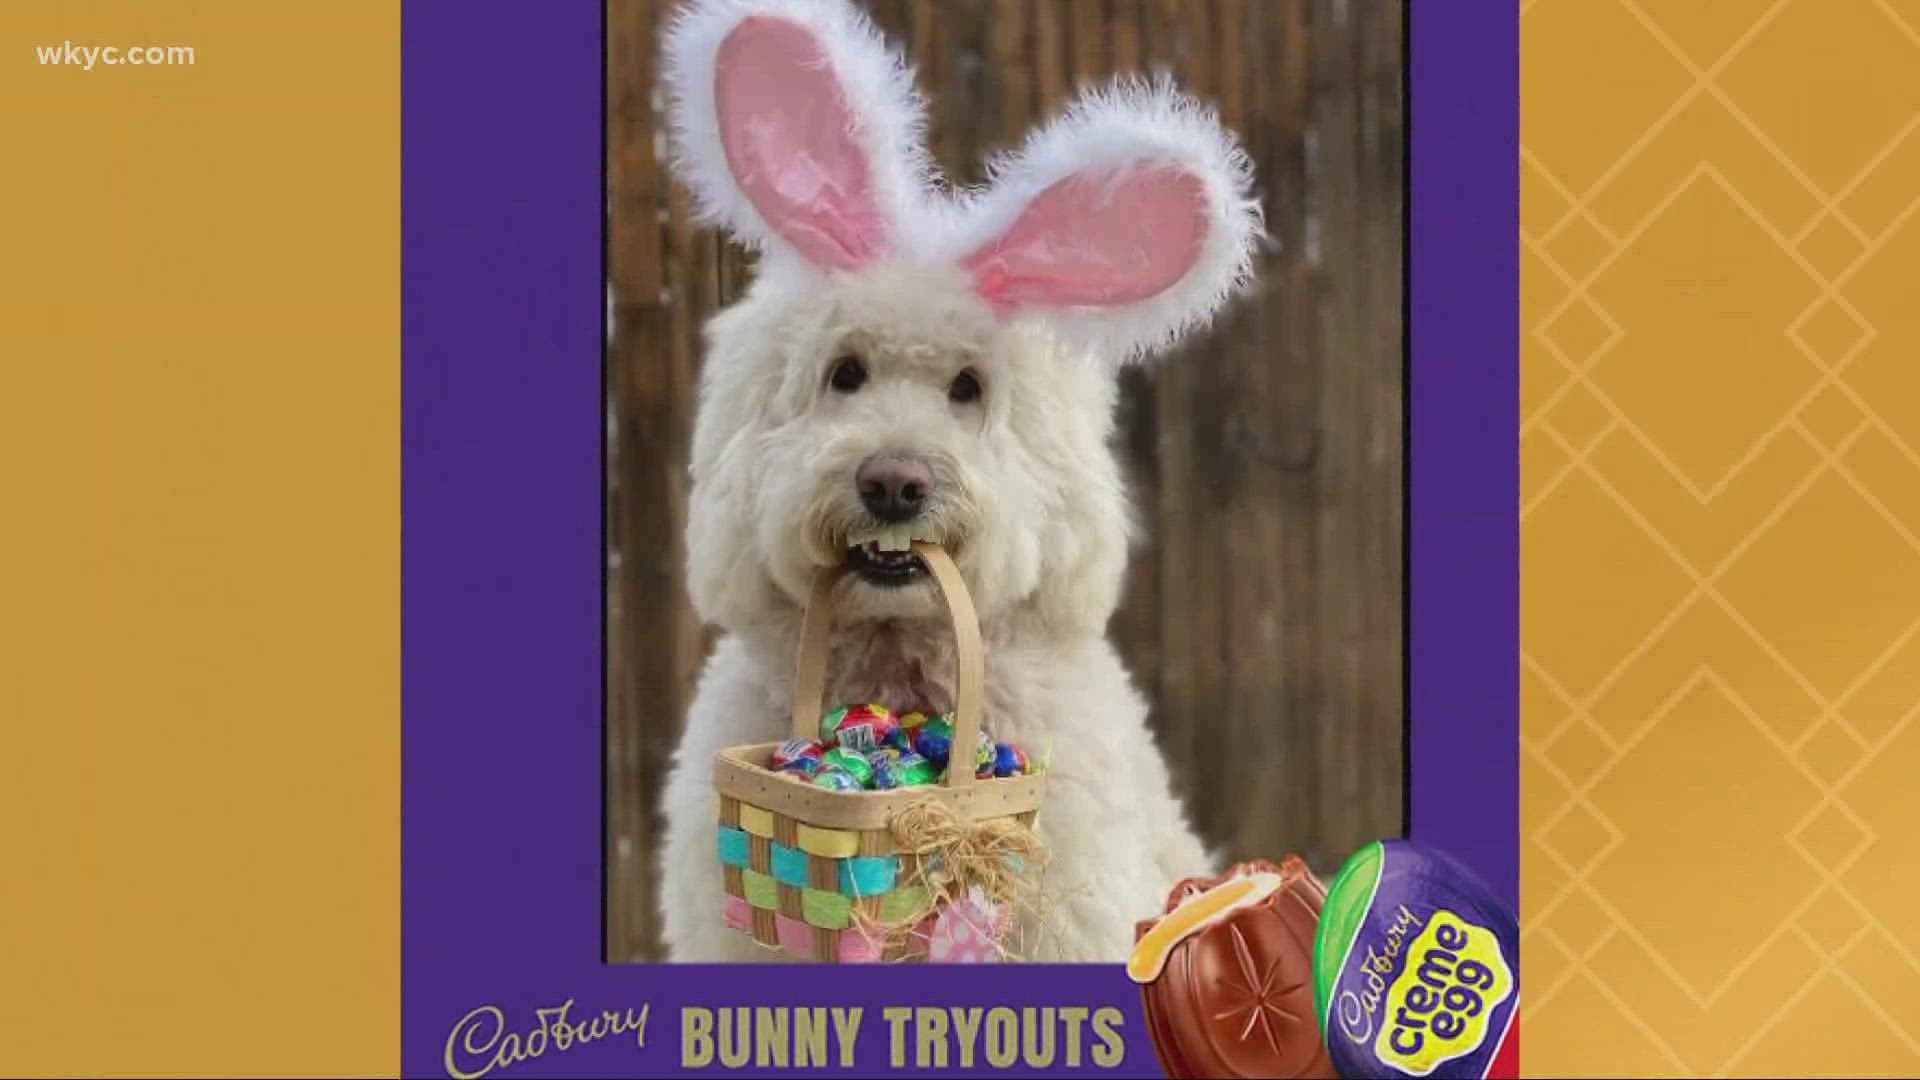 An Ohio pup is in the running to be featured in the next Cadbury Bunny commercial. Annie Rose – an English Doodle from Cincinnati – is among 10 finalists.